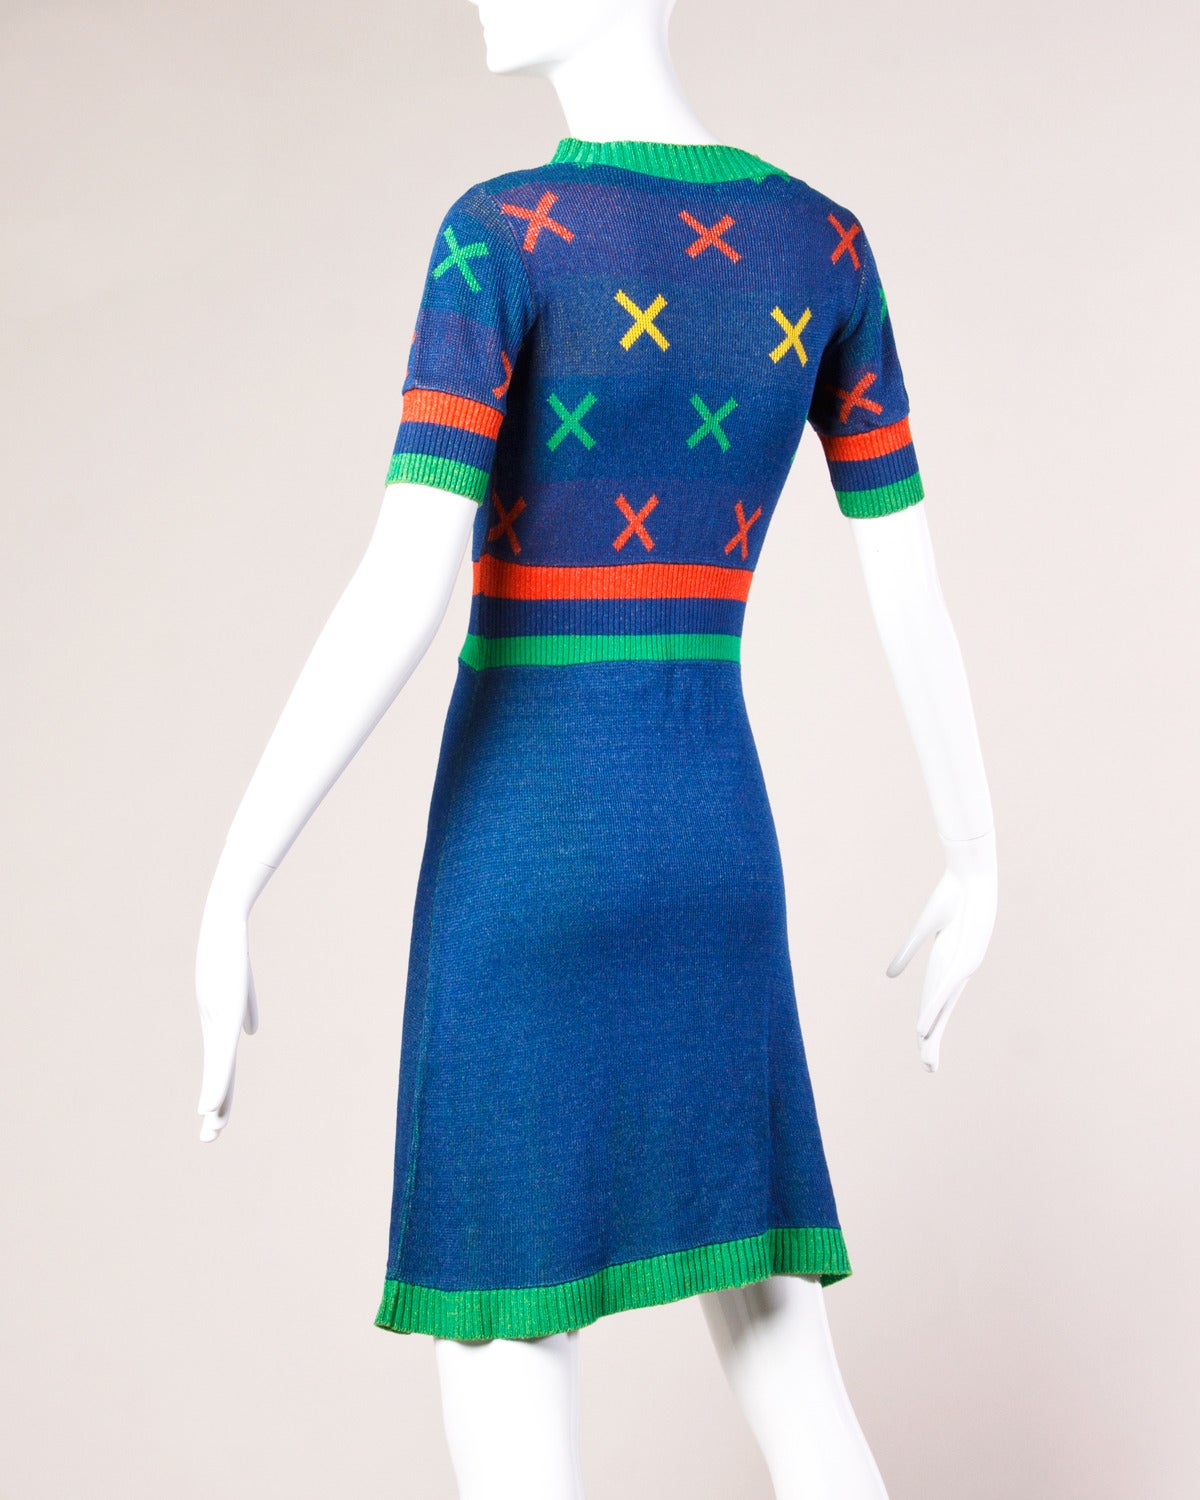 Colorful striped knit dress by Giorgio Sant'Angelo with an 